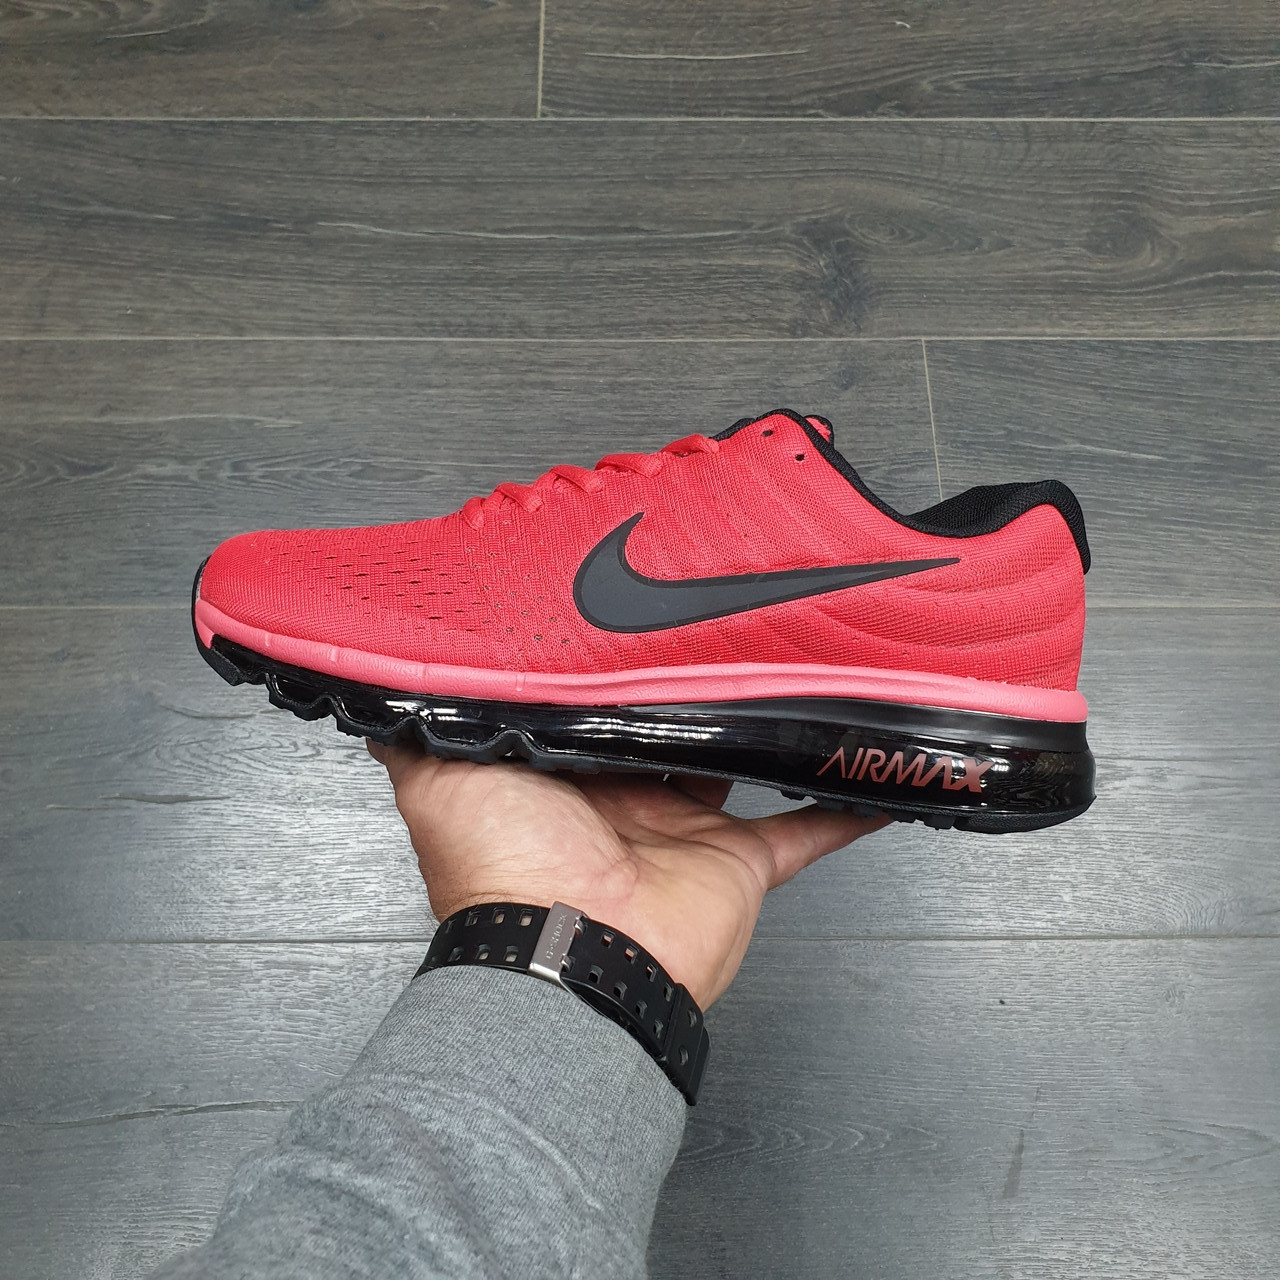 Nike's Air Max 2017 Gets A Sporty "Team Red" Colorway Nike Air Max,  Sneakers Fashion, Hot Sneakers | sptc.edu.bd